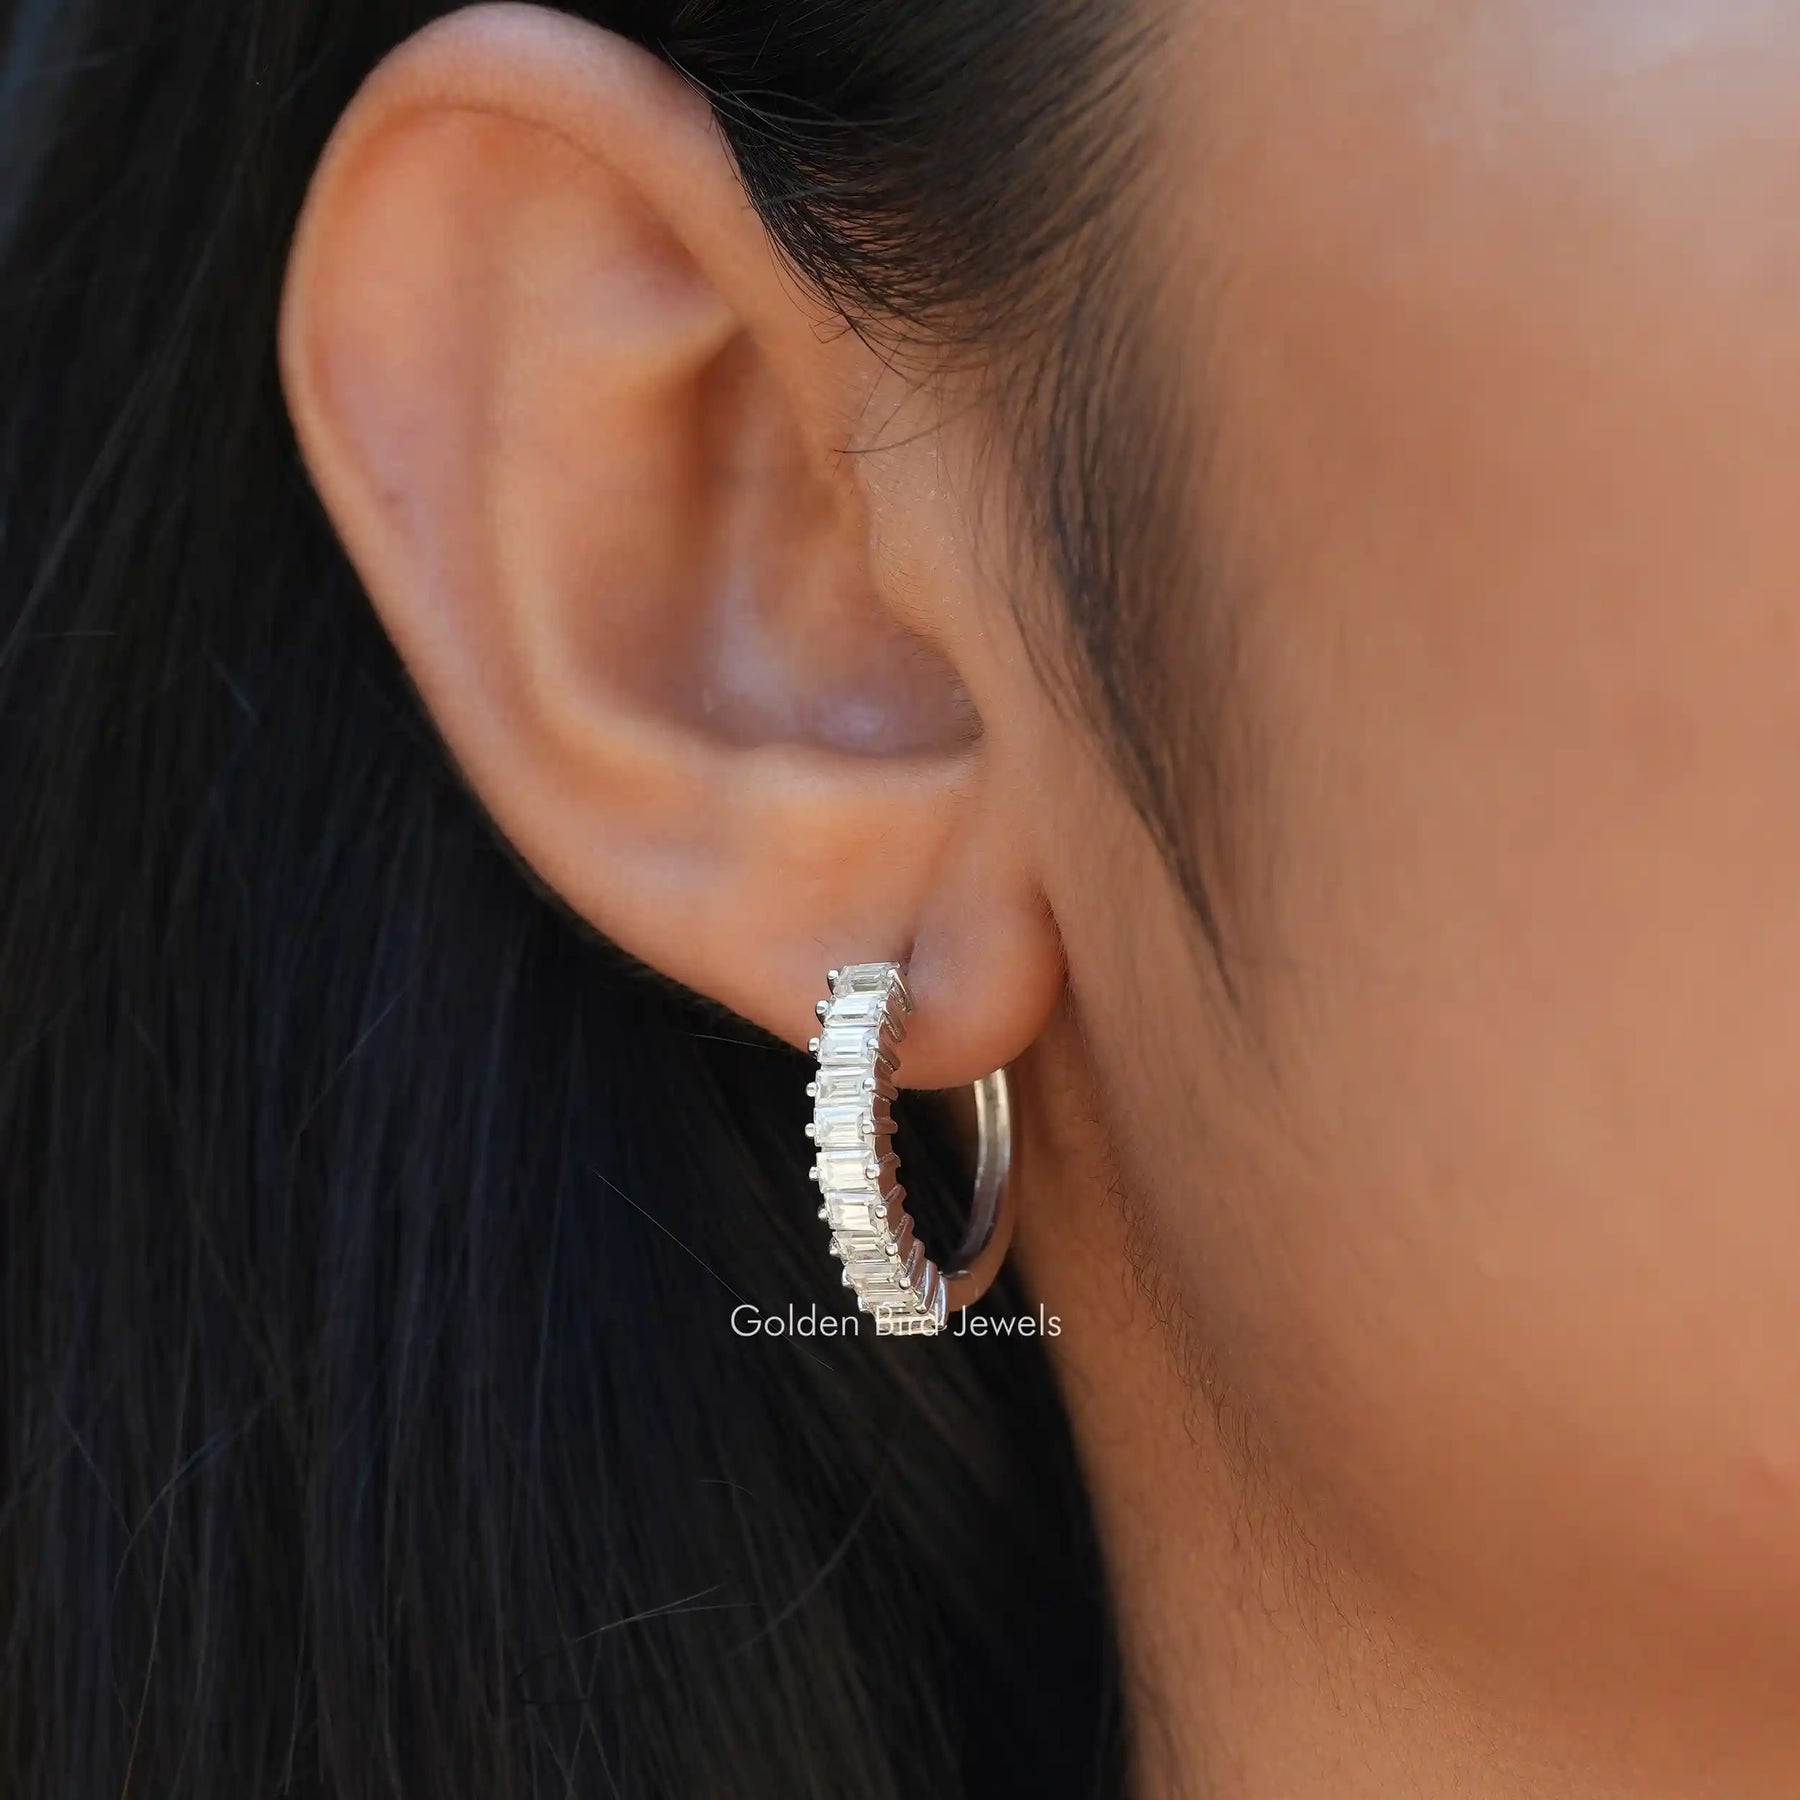 [In ear front view of moissanite earrings set in prong setting]-[Golden Bird Jewels]